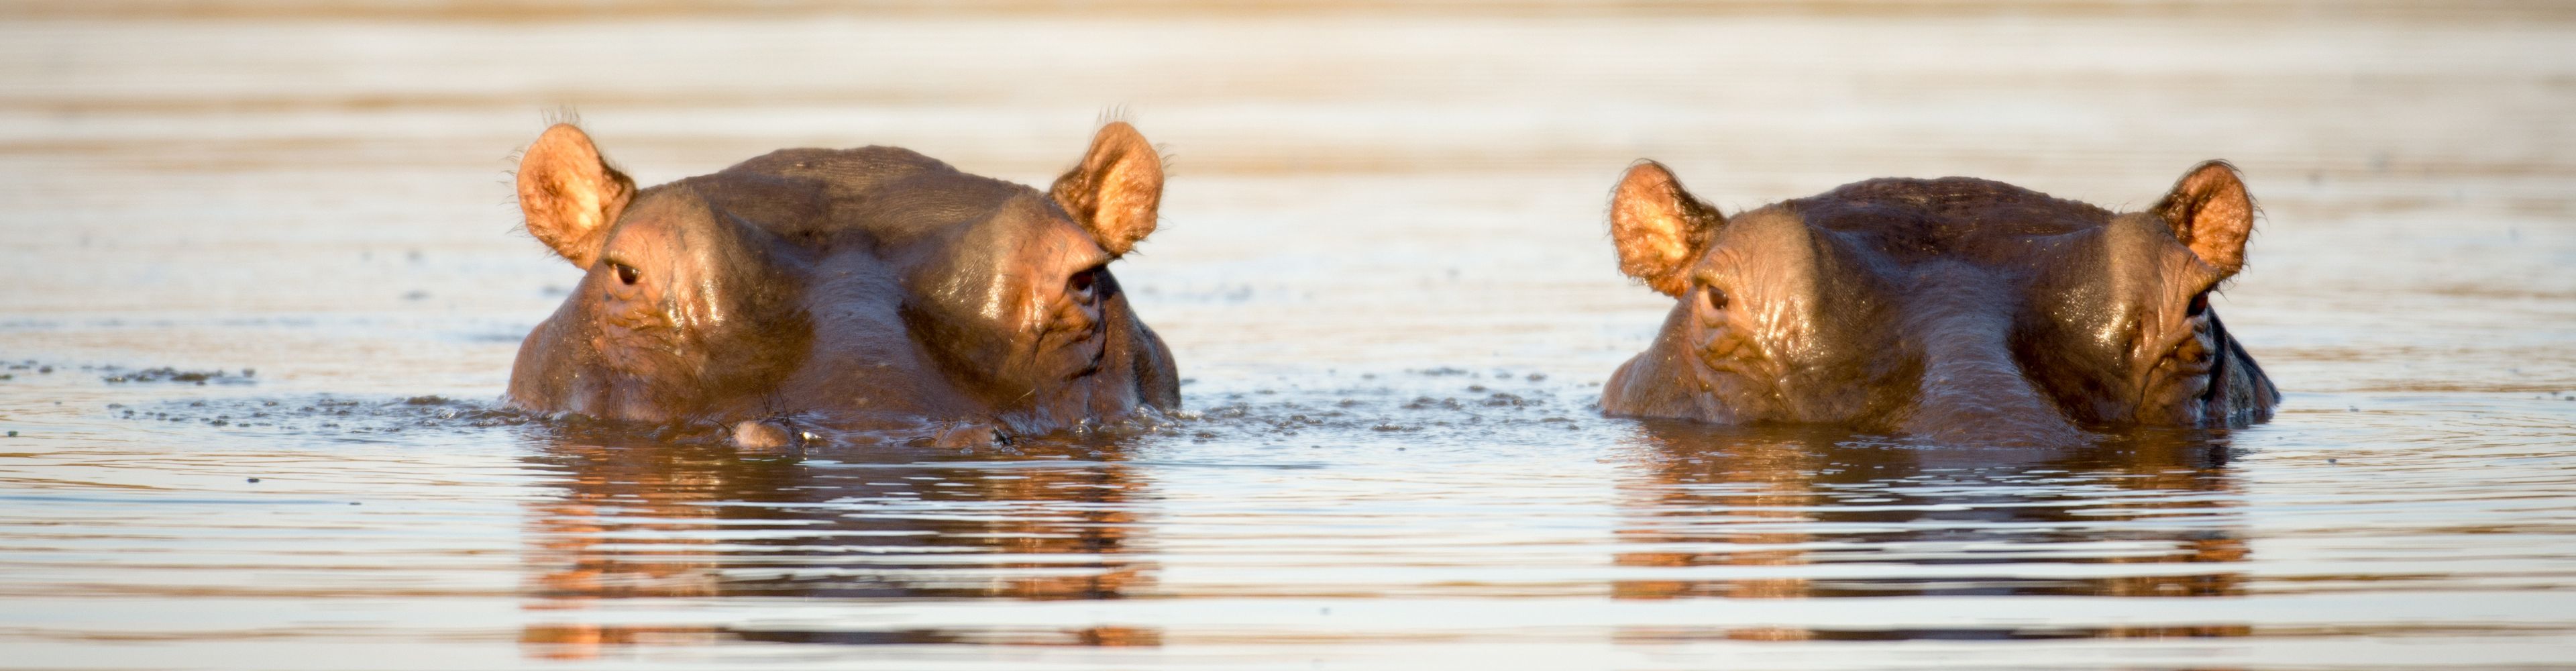 Two submerged hippos in the sunset. Only eyes and ears look out of the water.